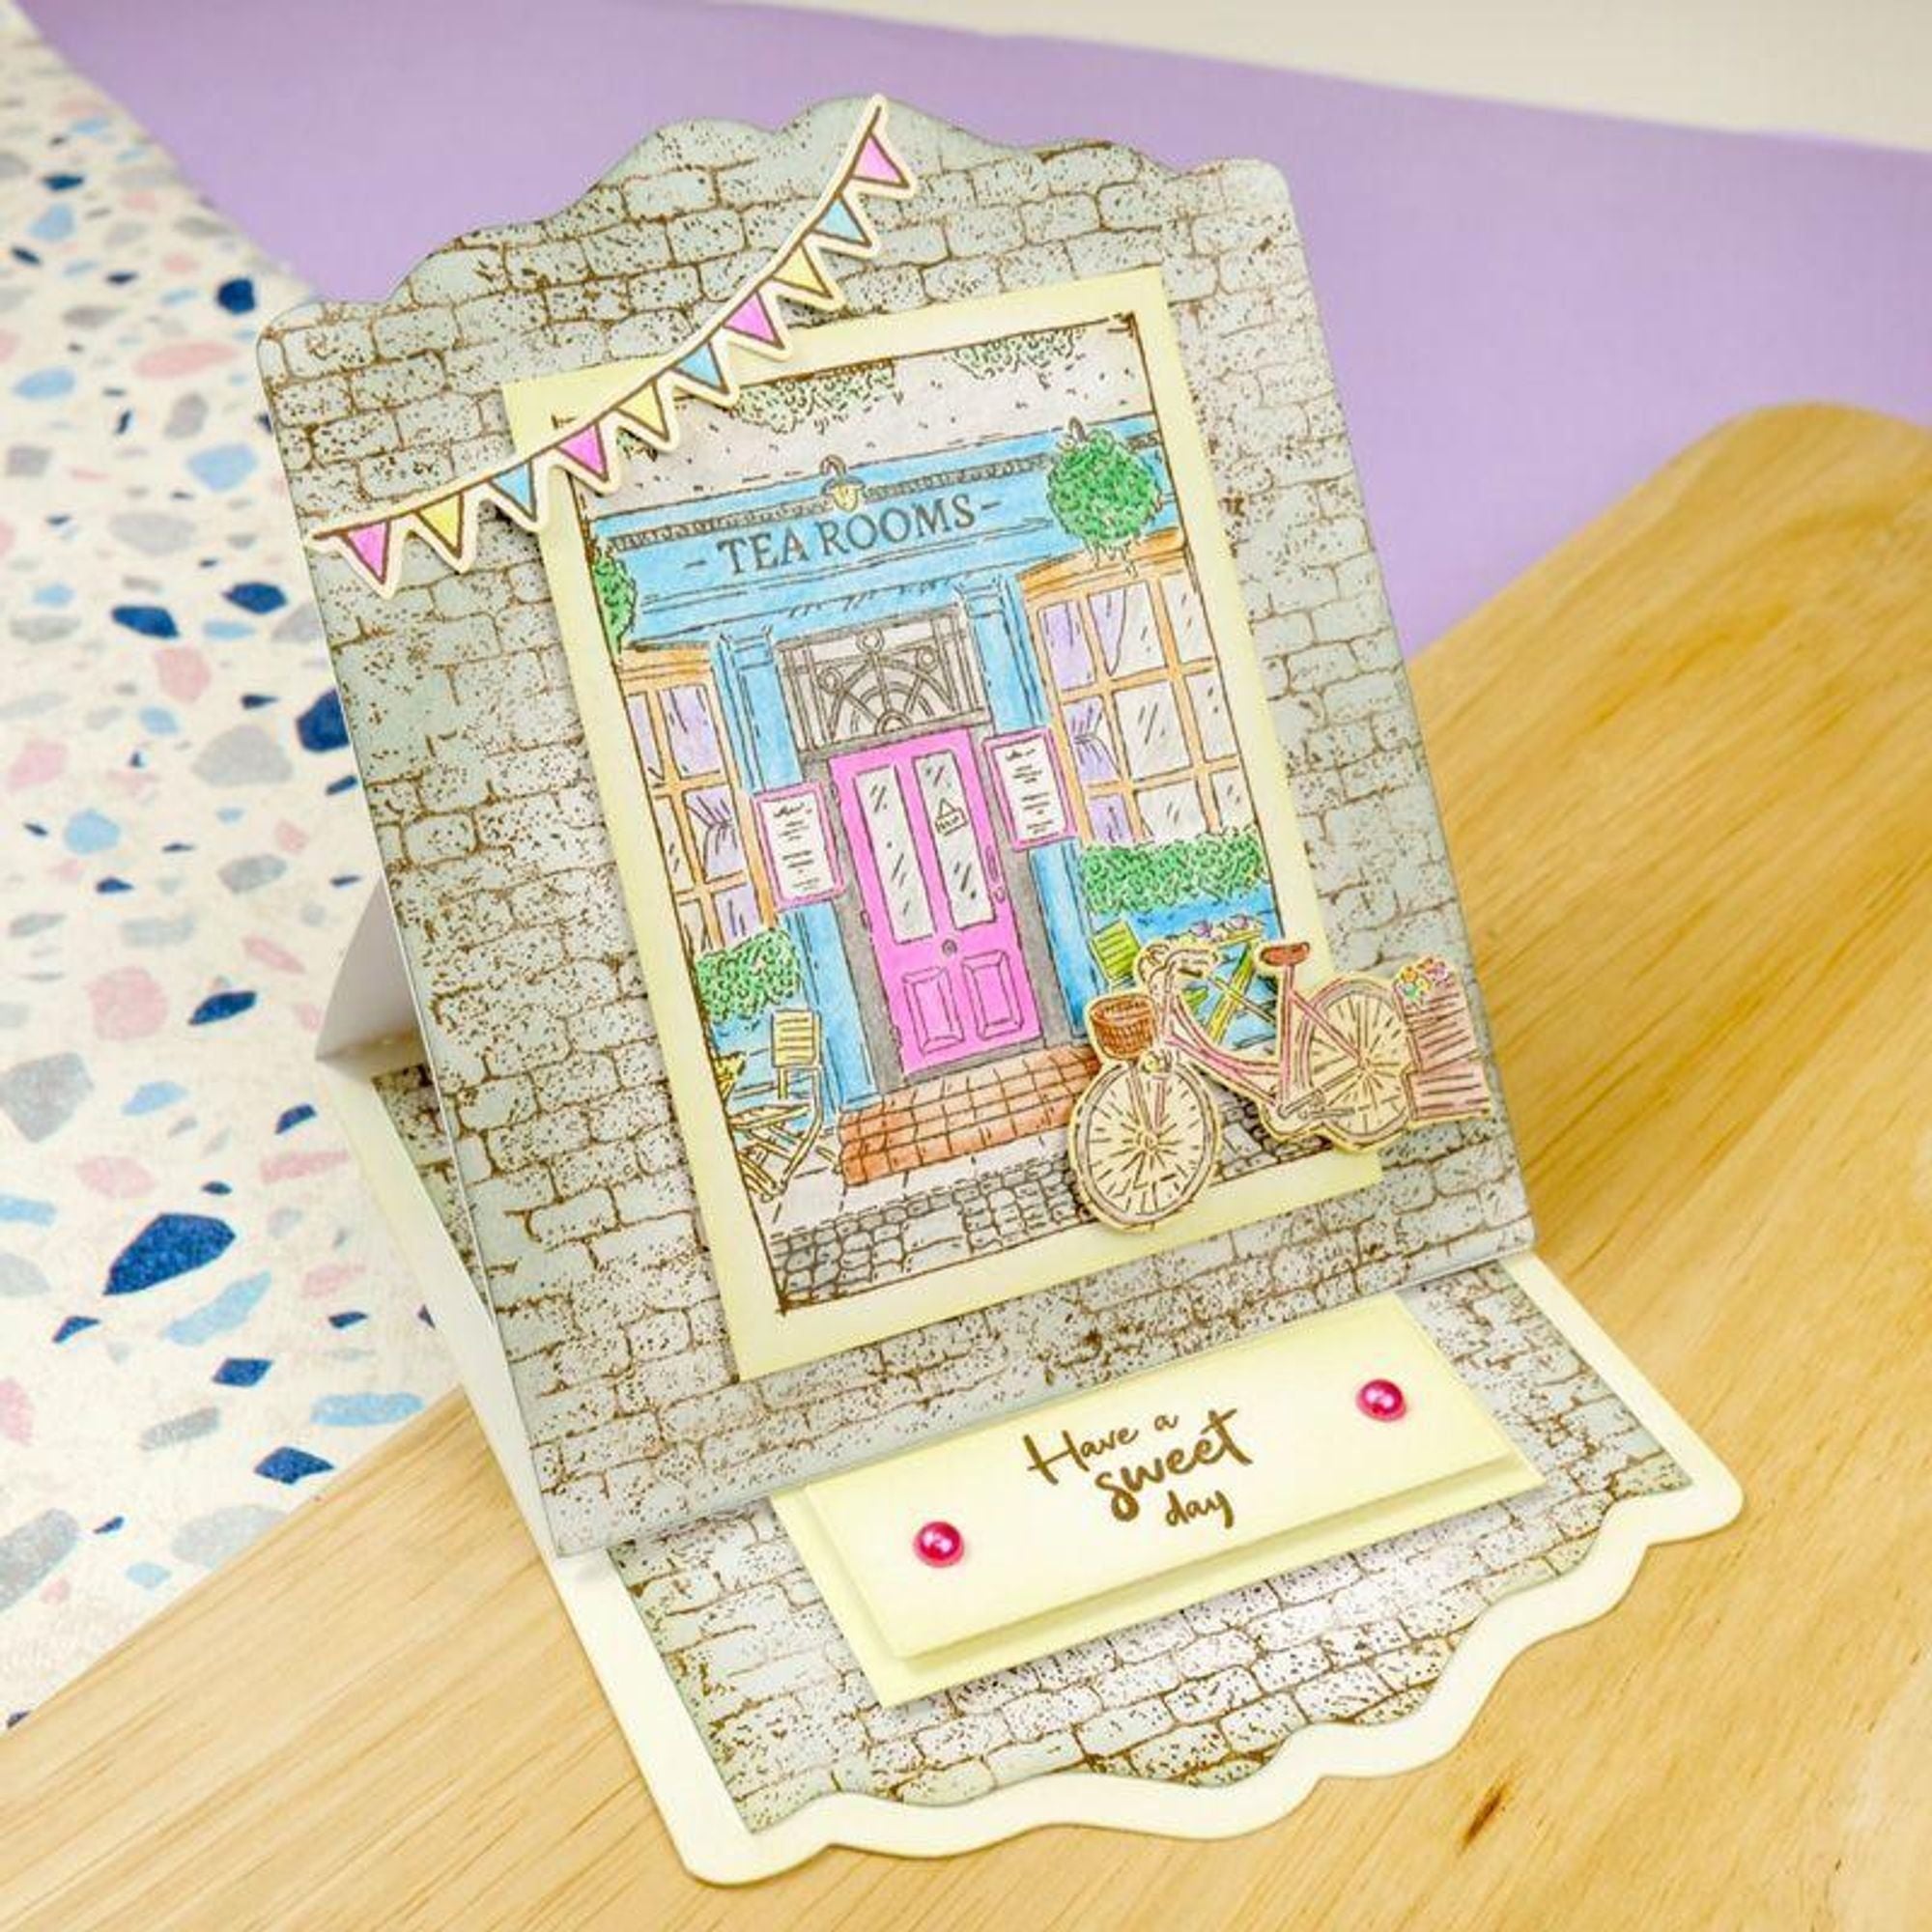 For the Love of Stamps - Tea Rooms A6 Stamp Set